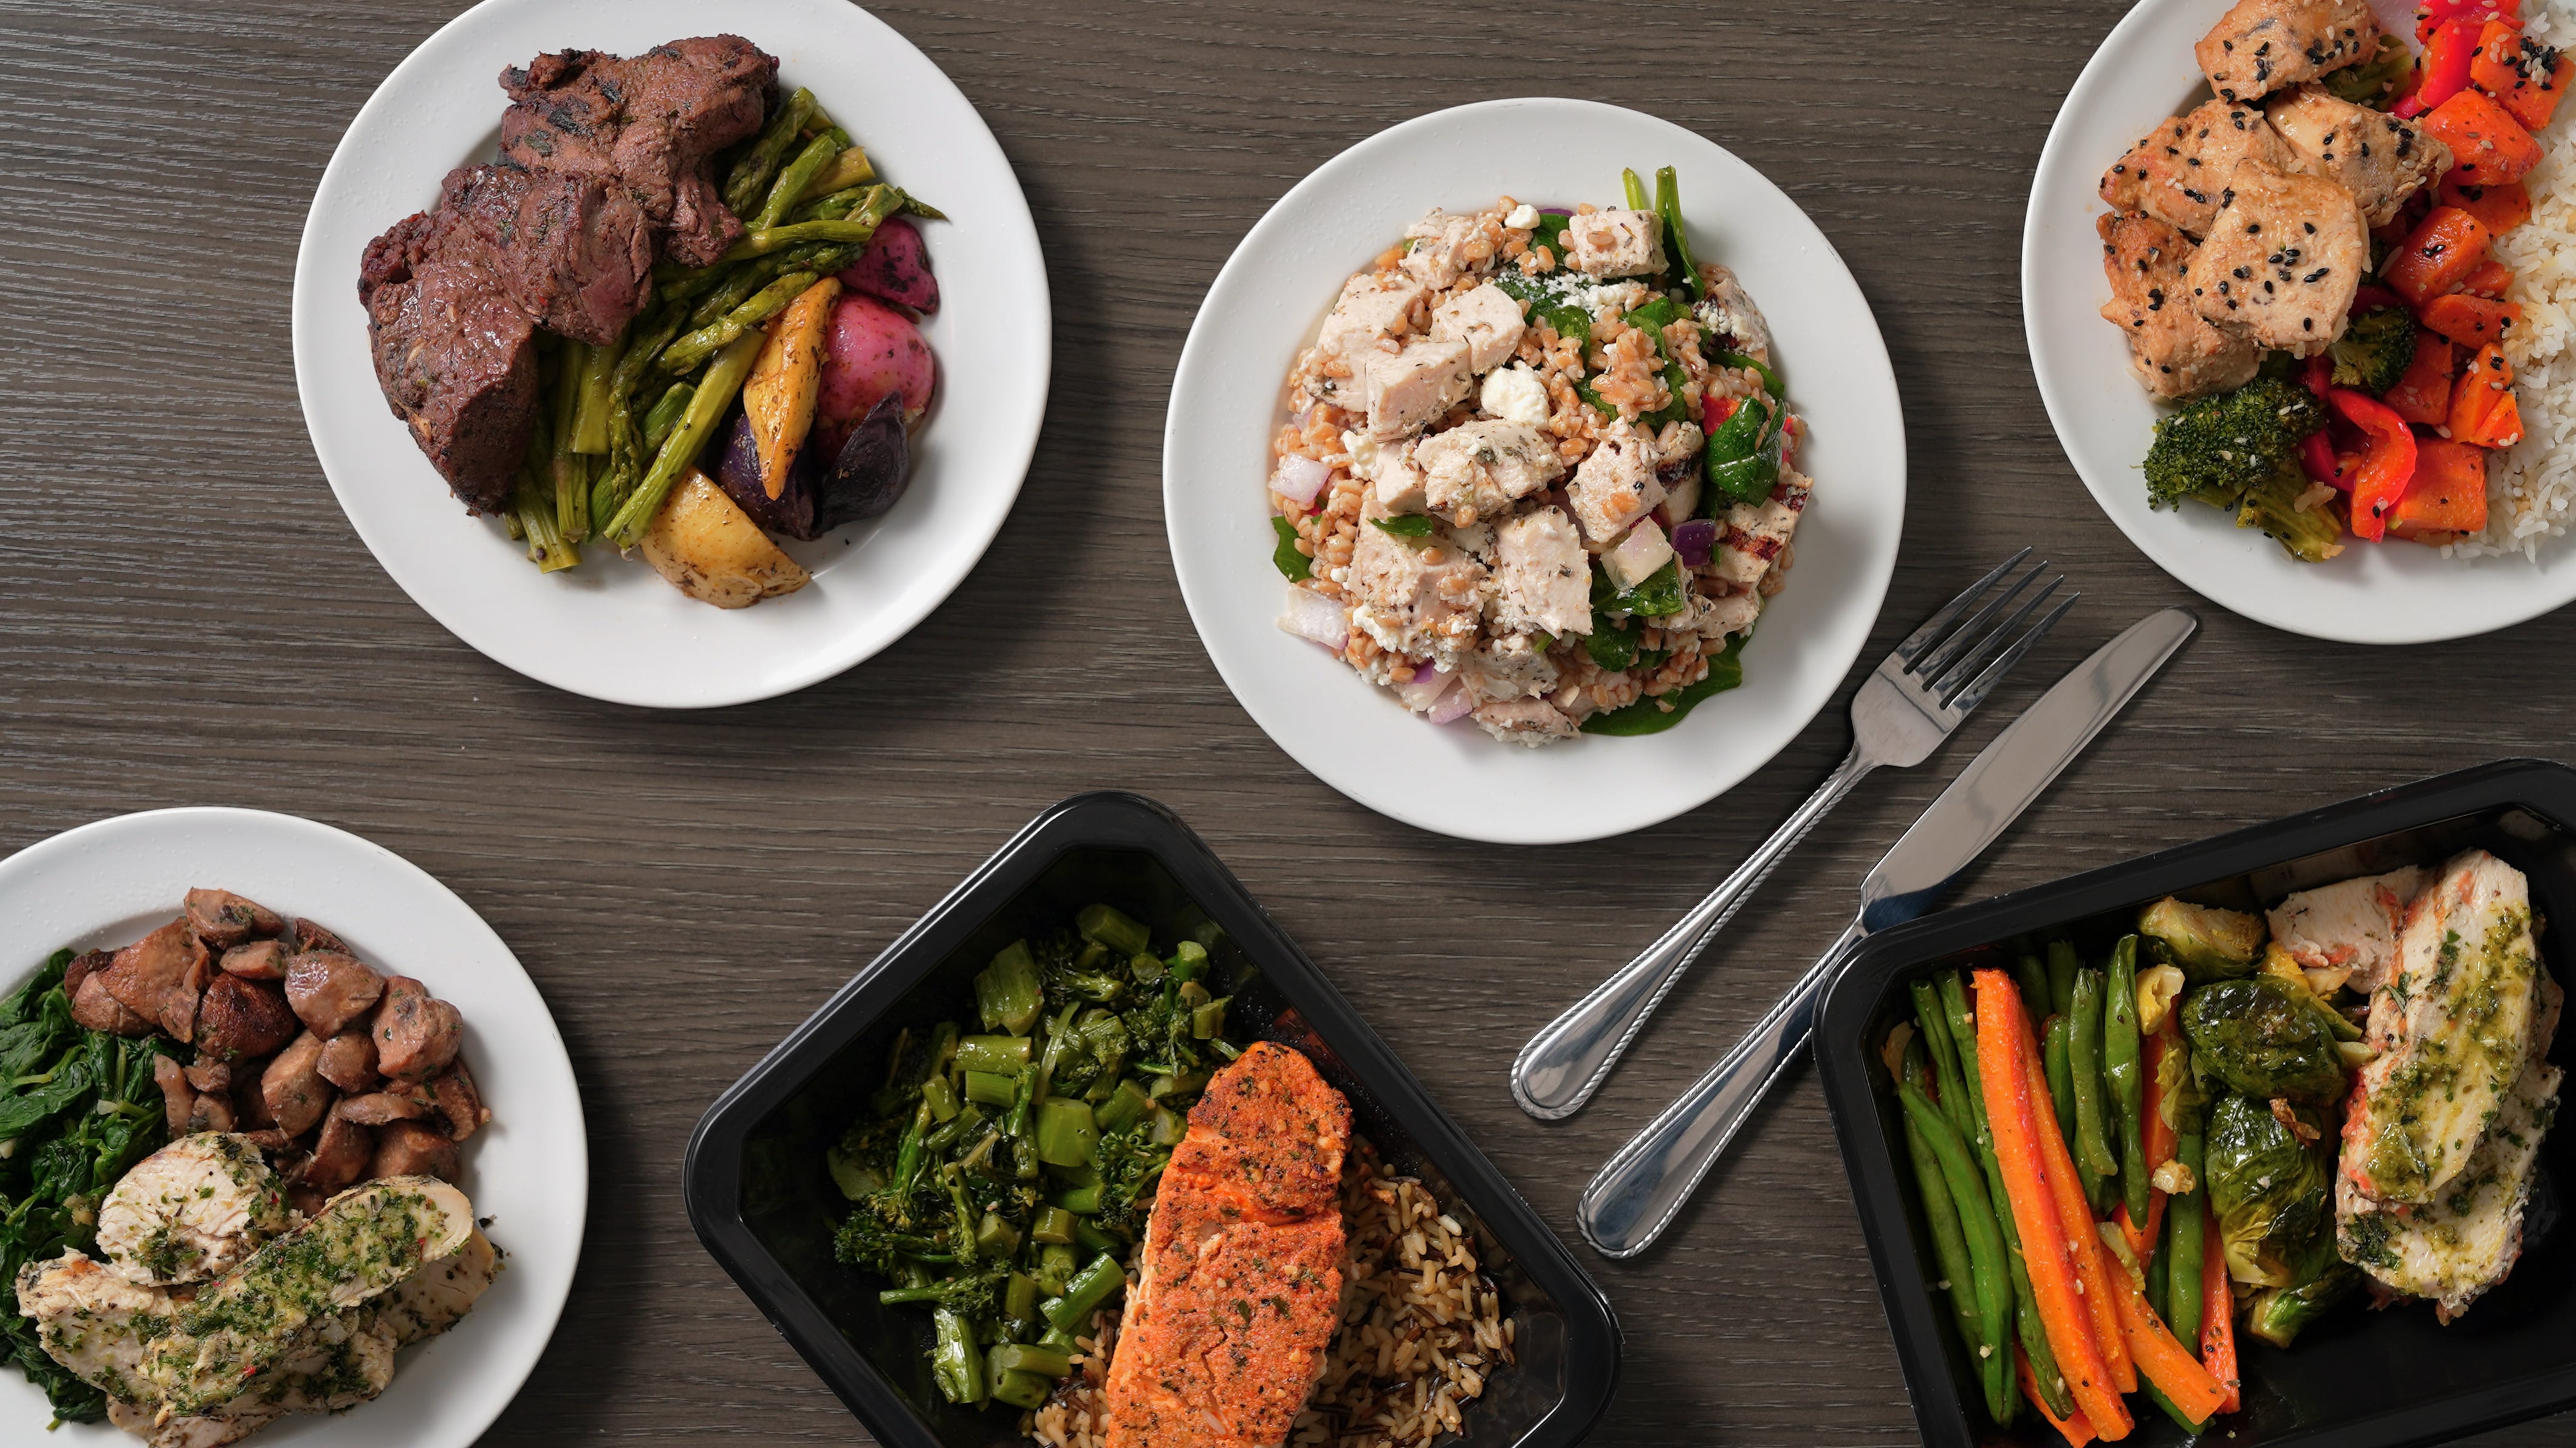 Looking for Convenient and Delicious Diabetic-Friendly Meals? Nutre Has You Covered 